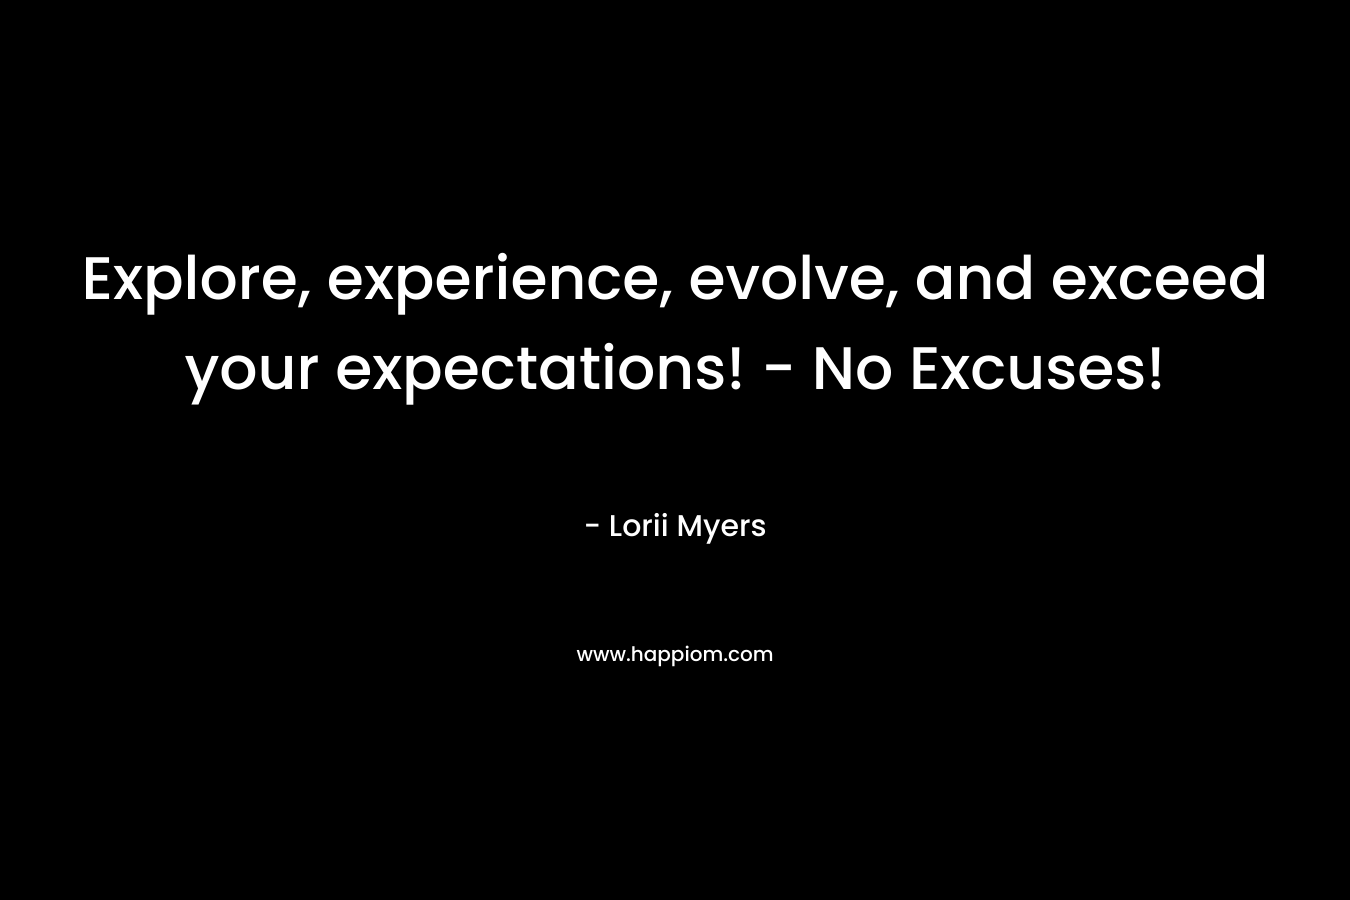 Explore, experience, evolve, and exceed your expectations! - No Excuses!